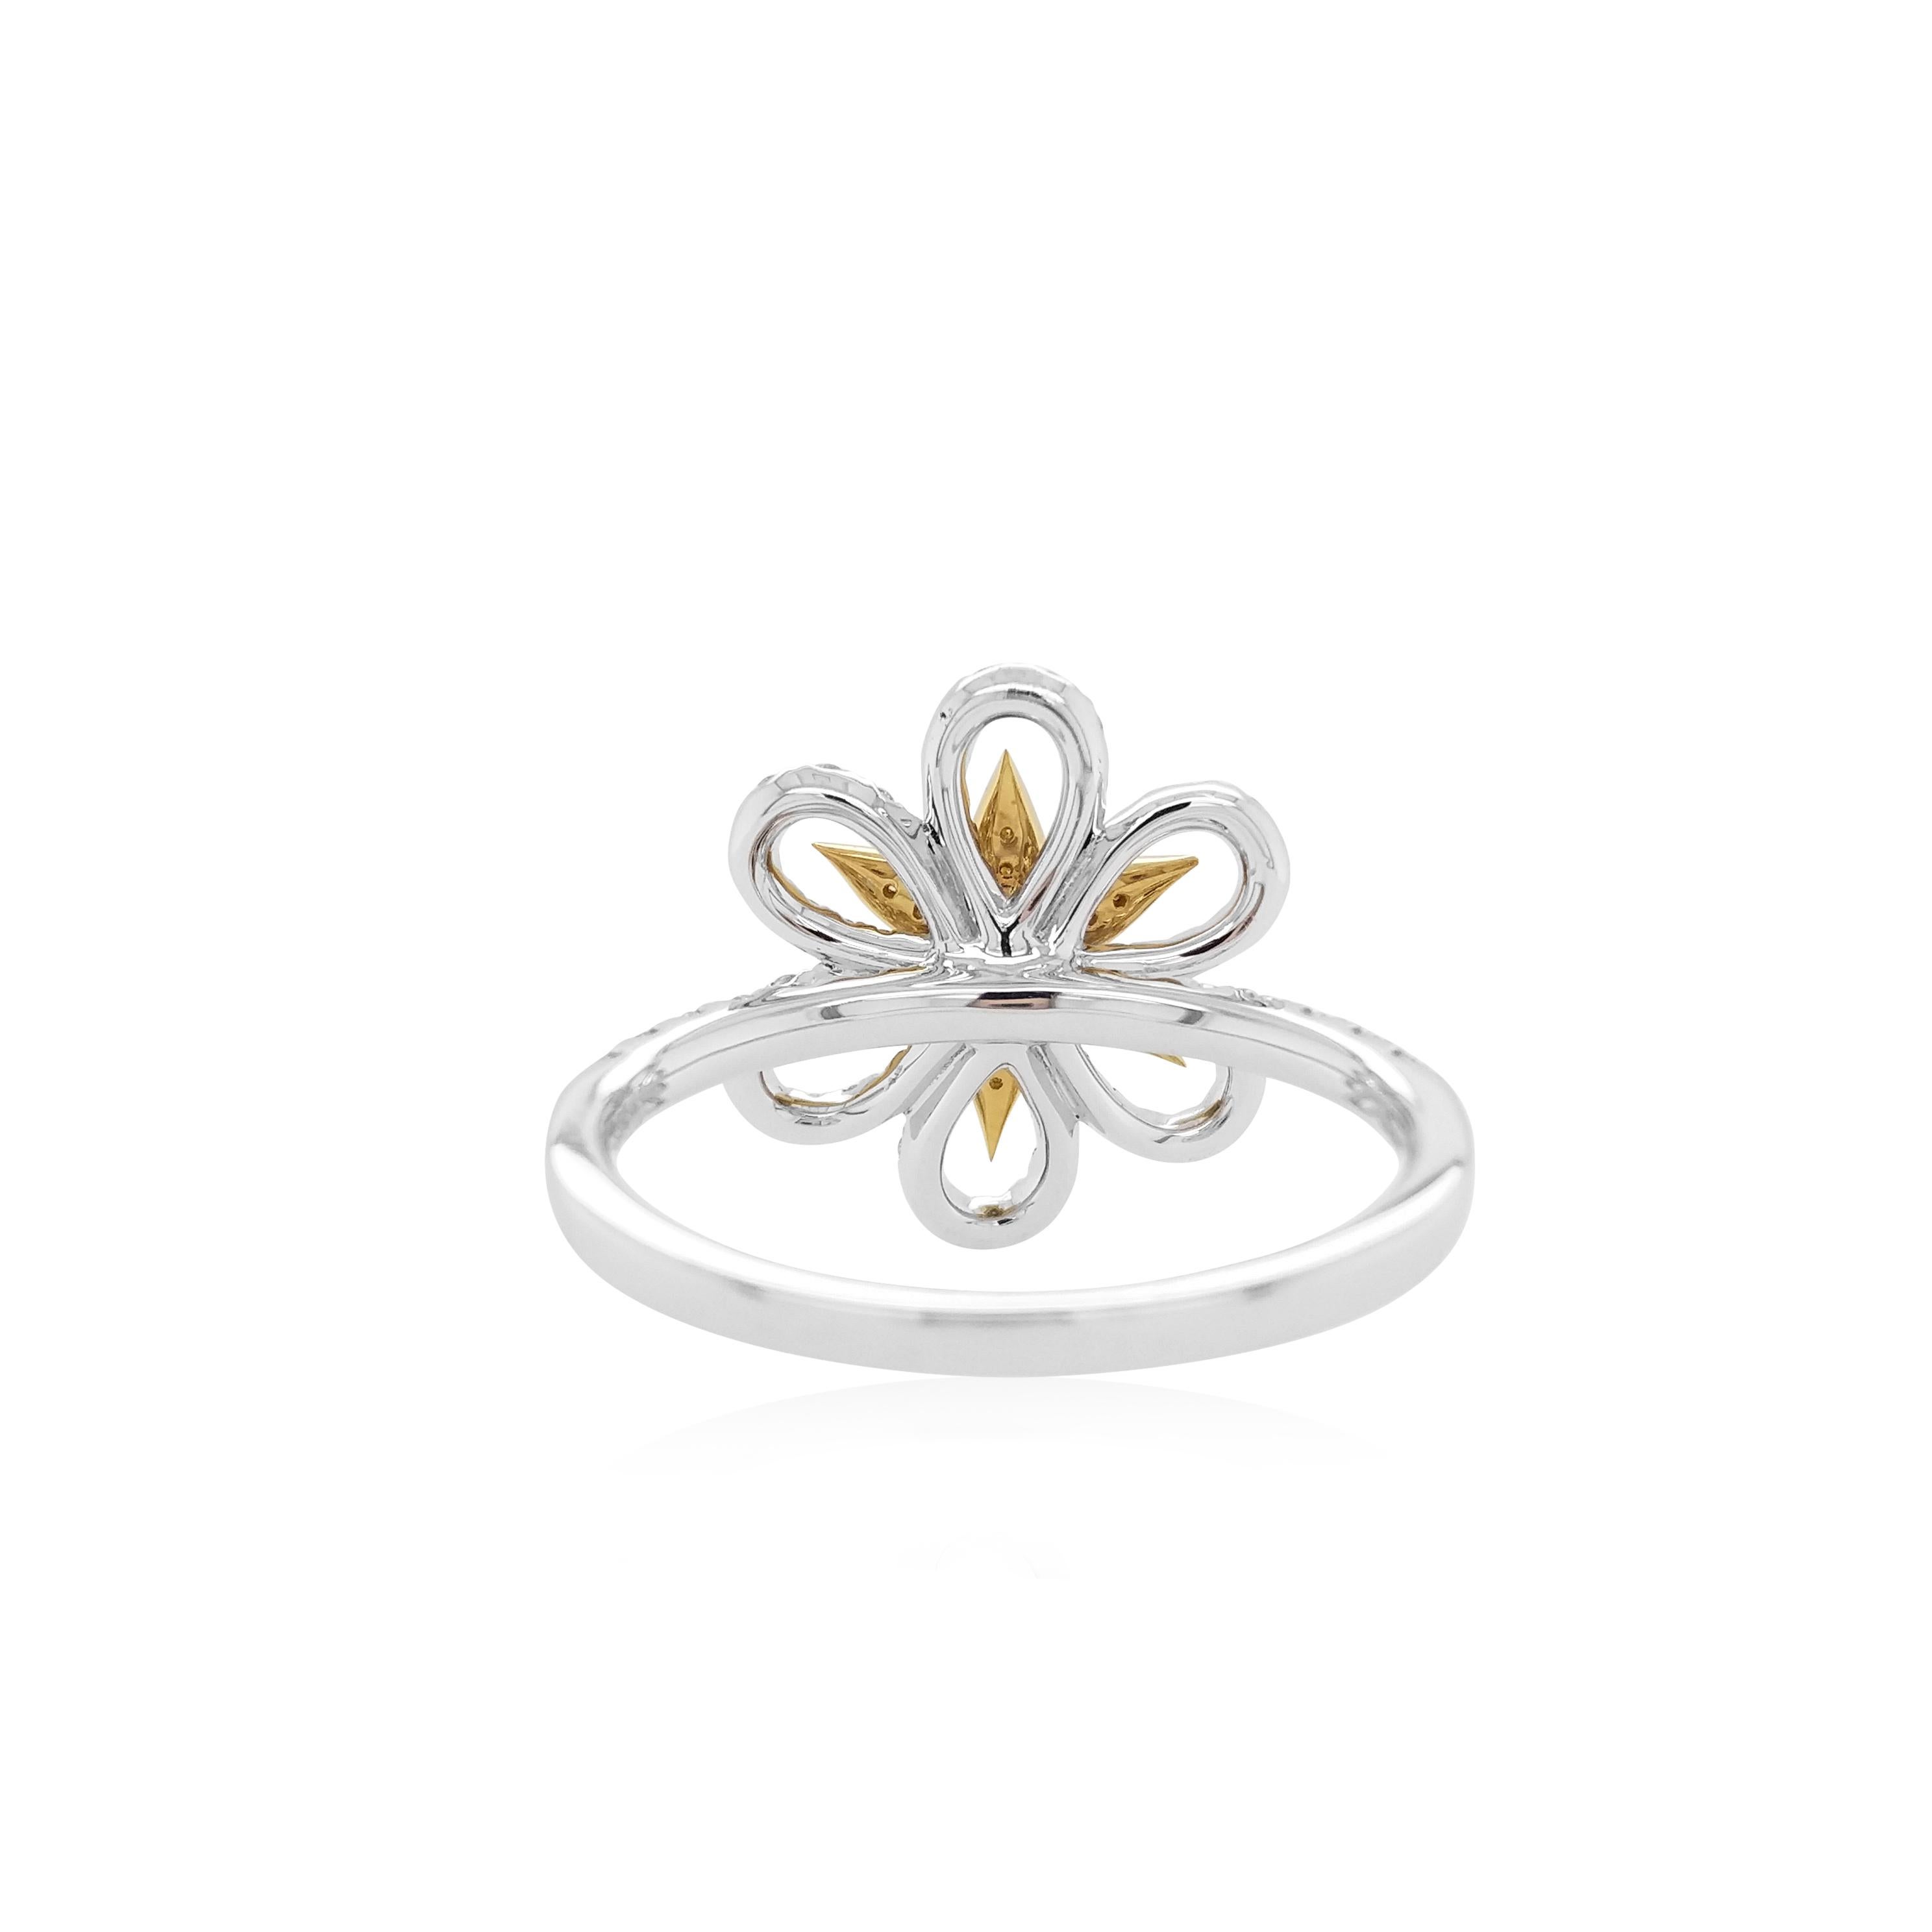 This unique floral ring features striking natural Yellow diamonds at its centre, surrounded by a bold pattern sparkling white diamonds. The perfect piece to take you from day to night, this ring will elevate any outfit - especially when paired with